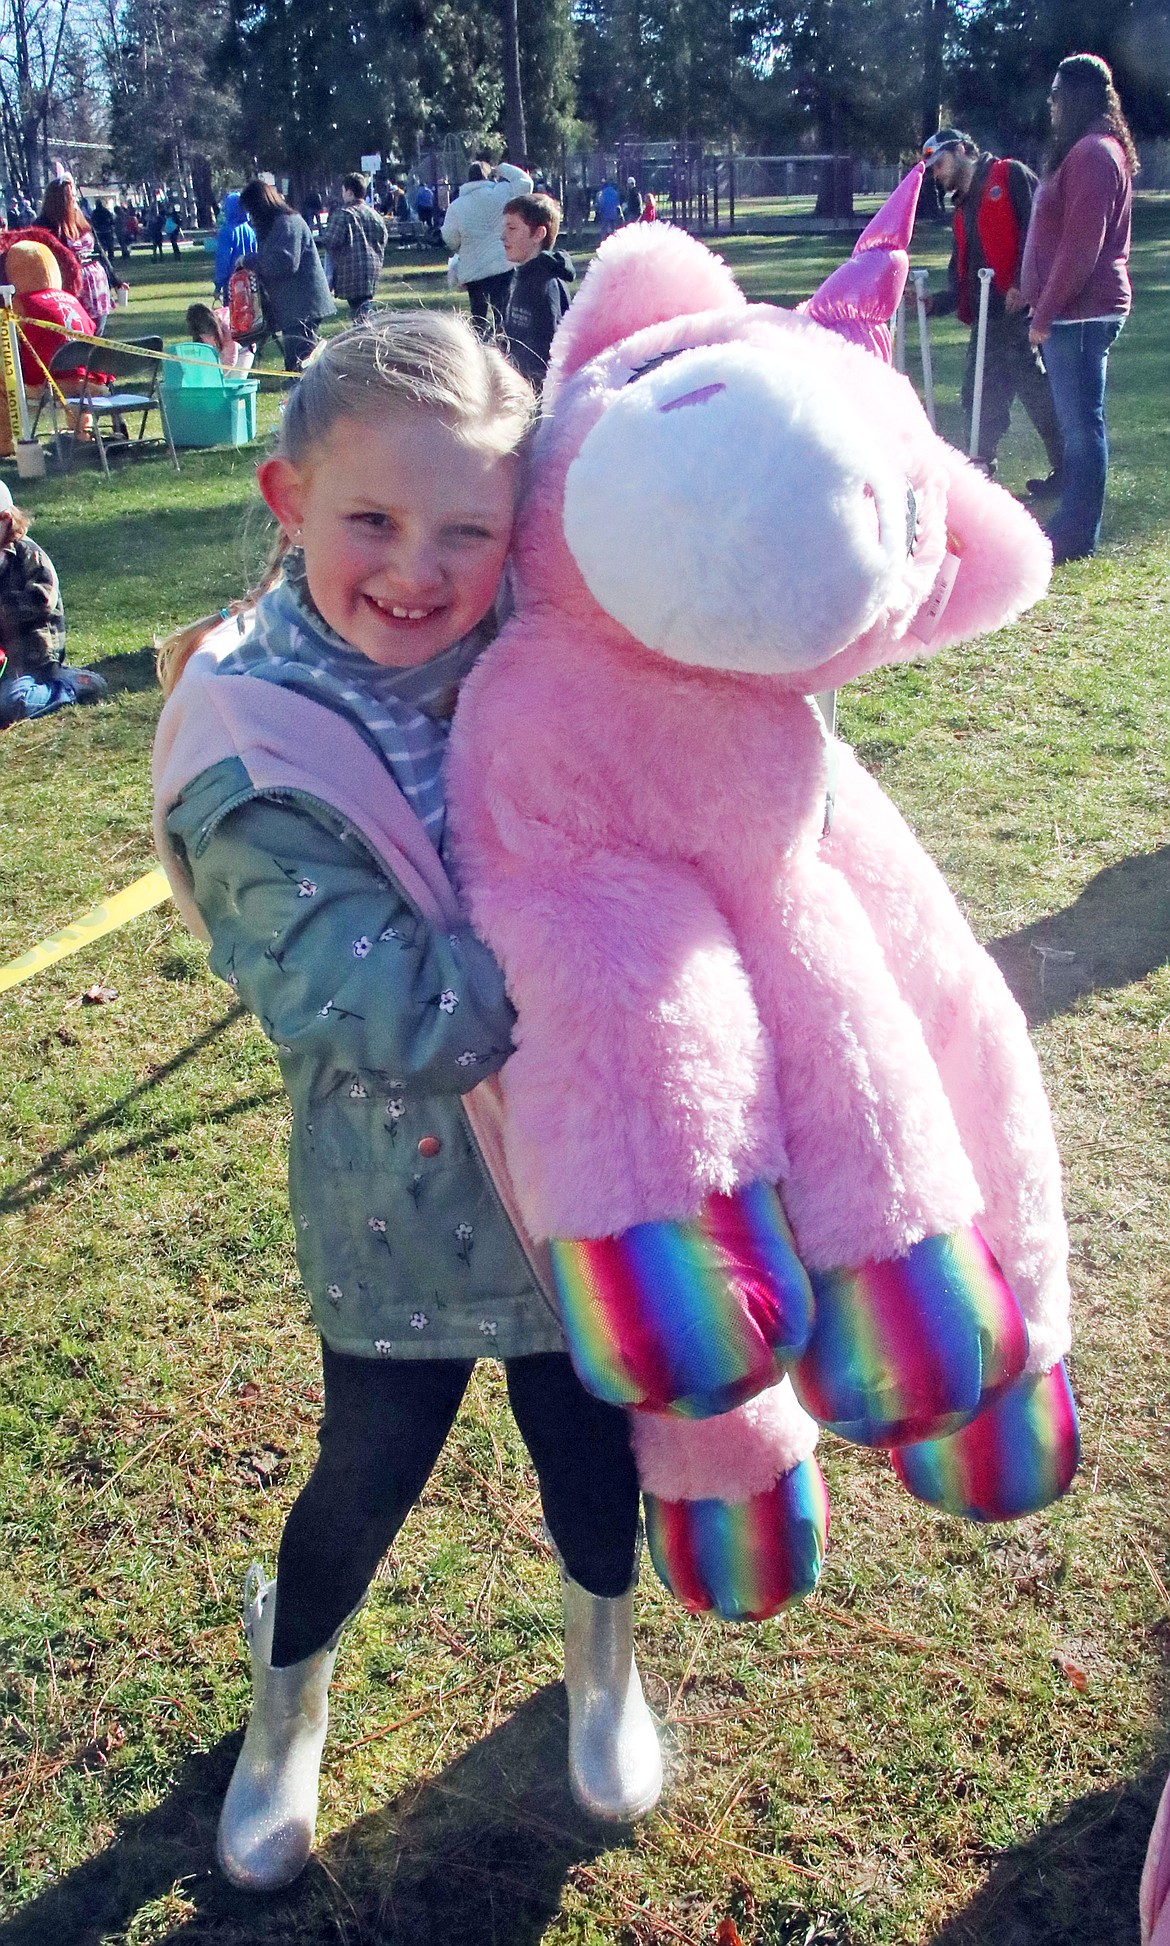 McCall Carey holds the large stuffed unicorn she received after finding a egg with a special ticket tucked inside for a prize. Several hundred local youth turned out for the annual Easter egg hunt, which has been held by the Sandpoint Lions for the past 70-plus years.